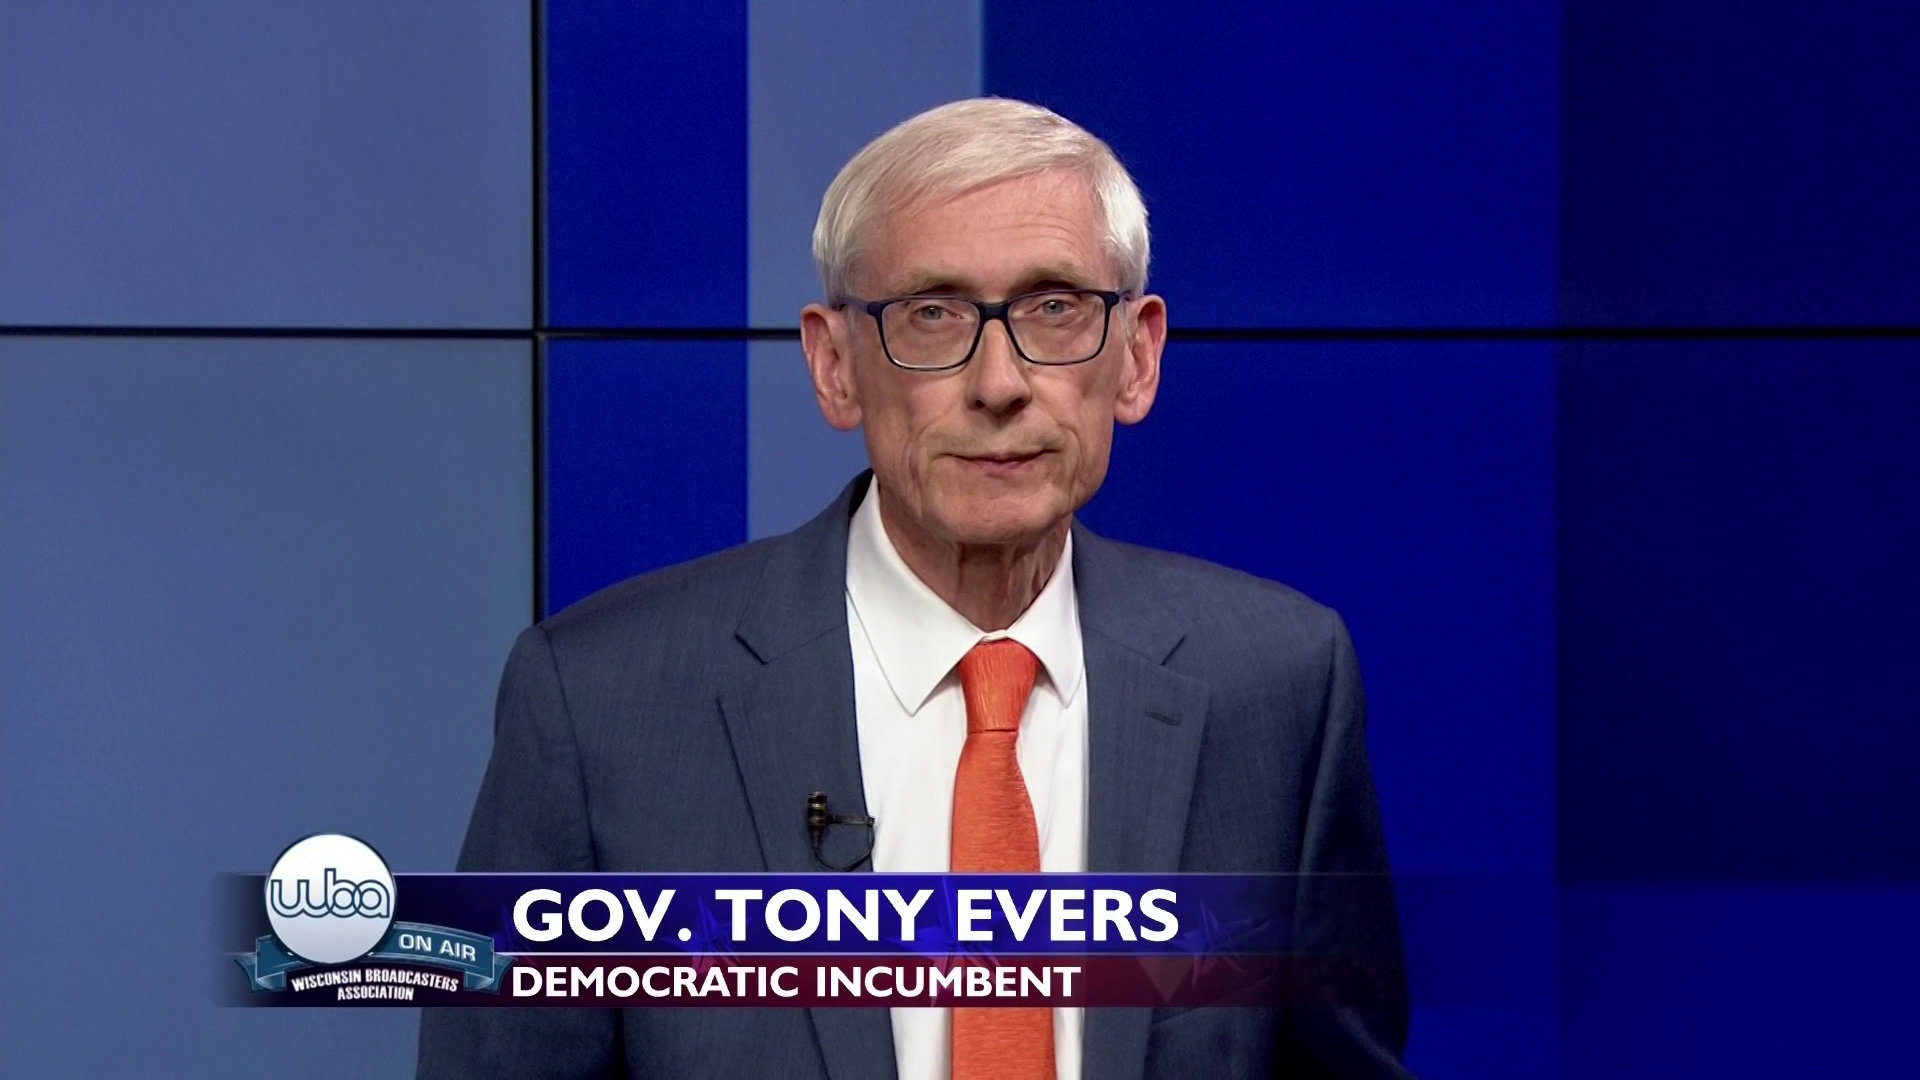 Tony Evers faces a camera during a televised debate.